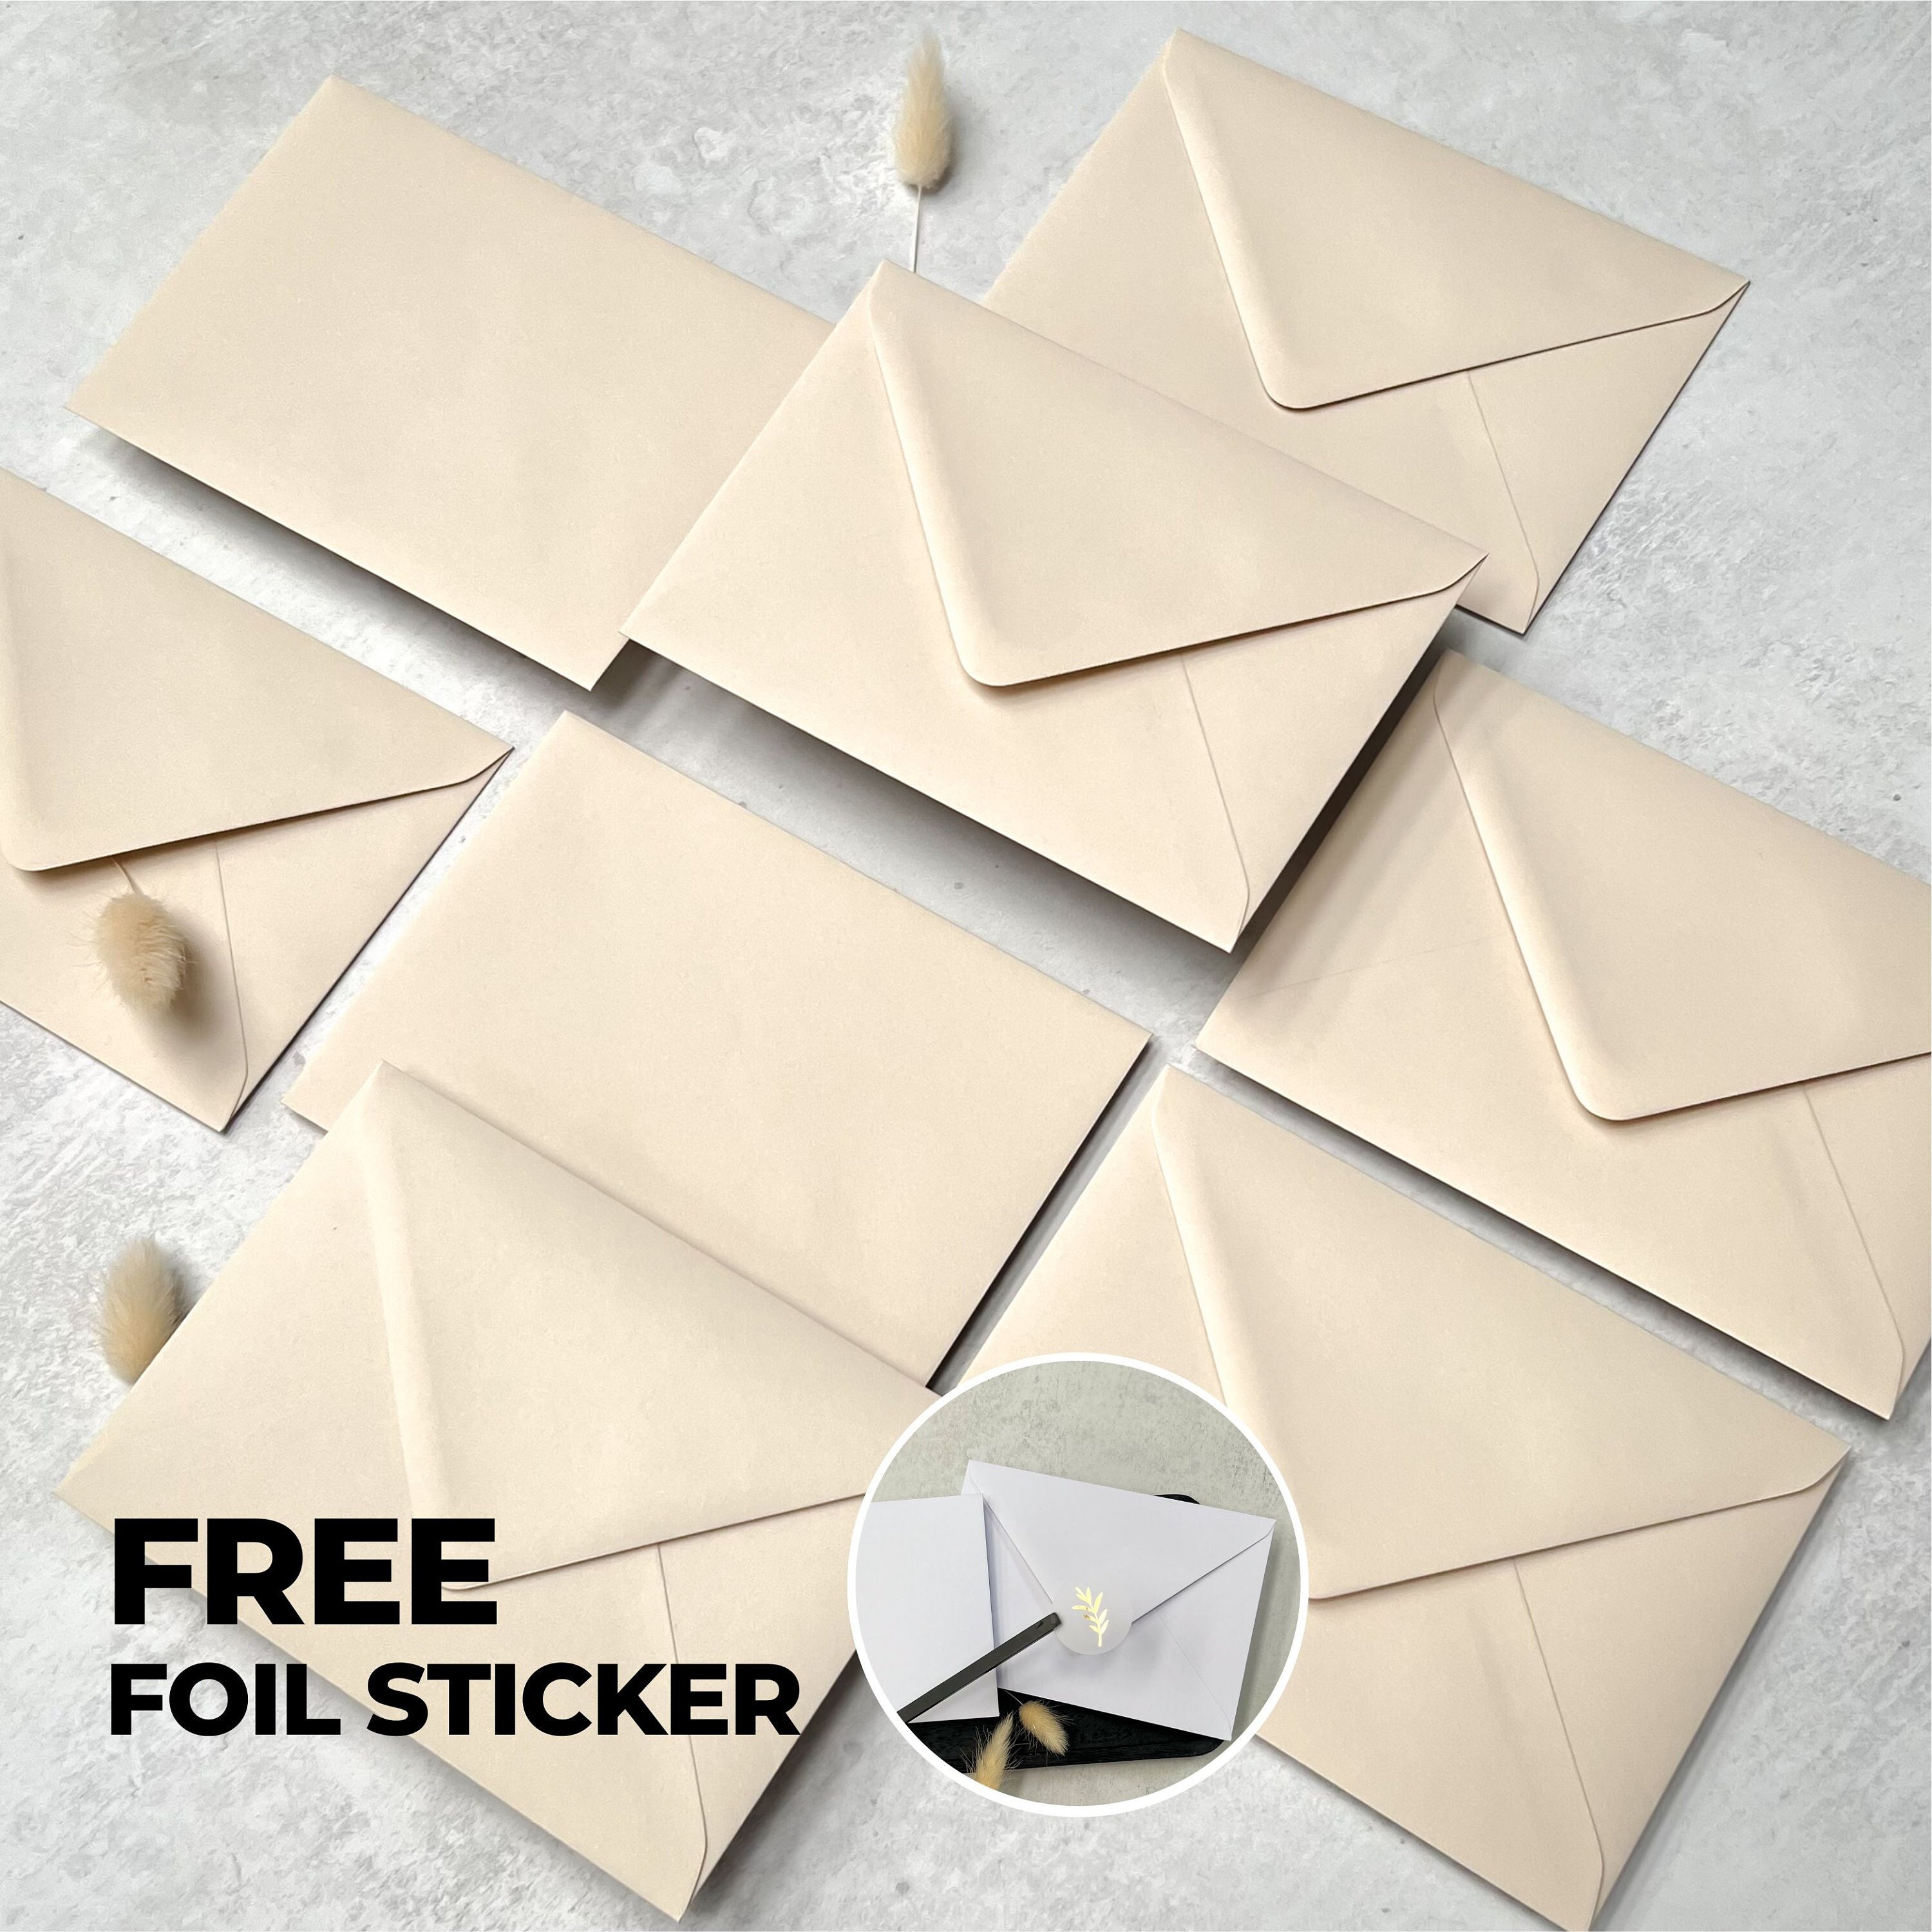 Blank A7 DIY Envelope Liner Templates on Canva Envelope Liner Templates Envelope  Liner 5 X 7 A7 Euroflap,a7 Square Flap,a6,4 BAR,A2 